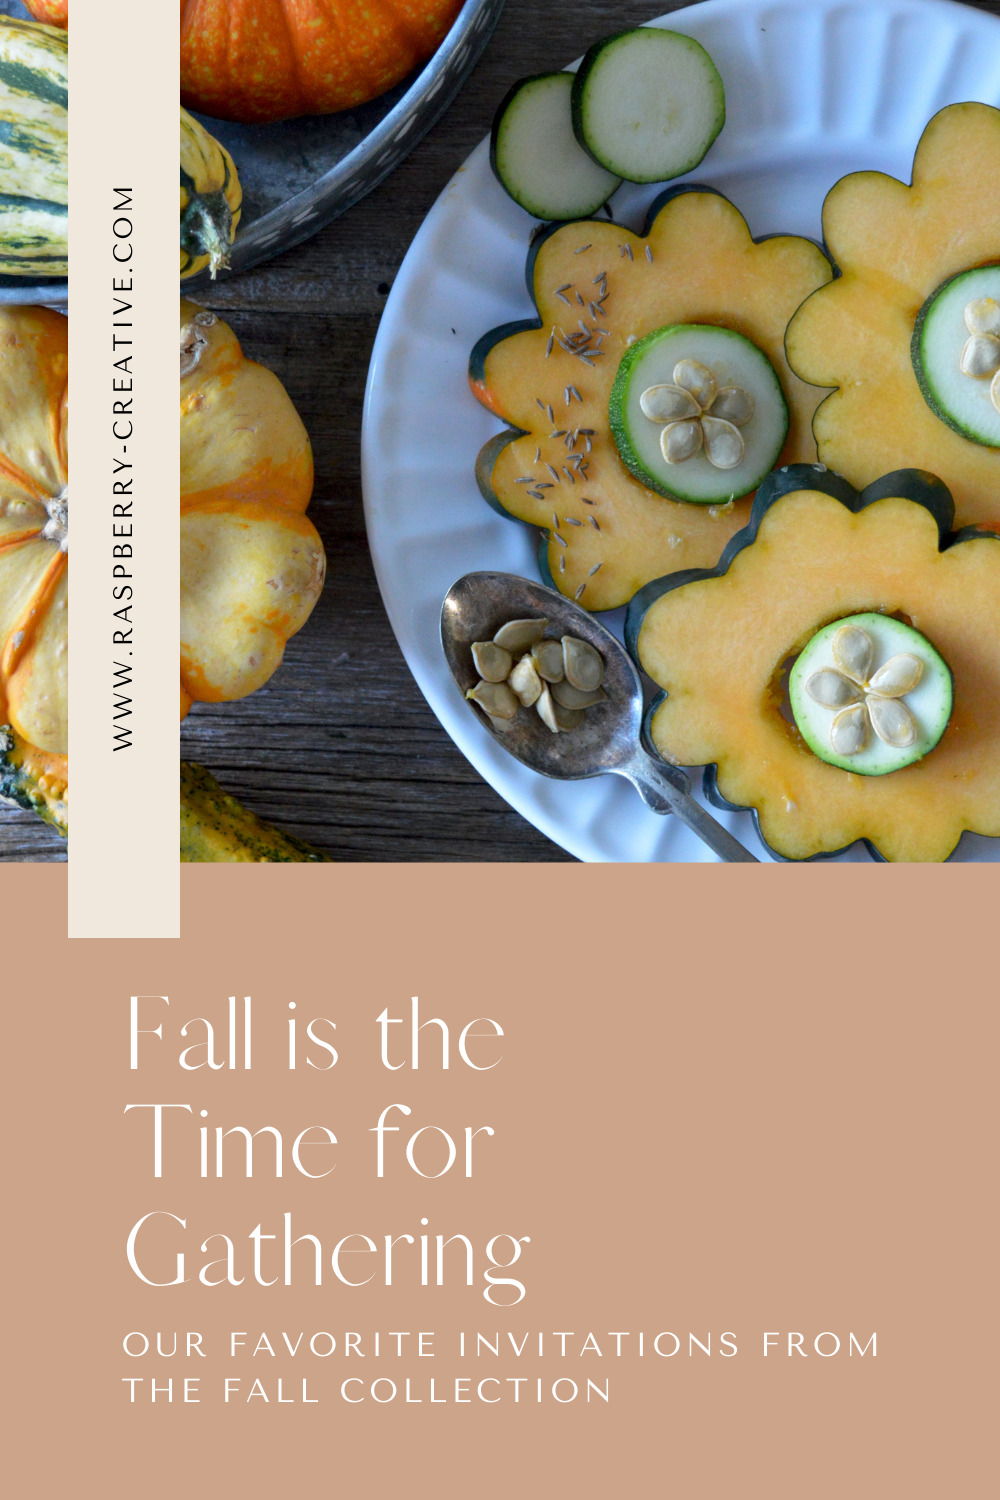 Fall is a time for Gathering